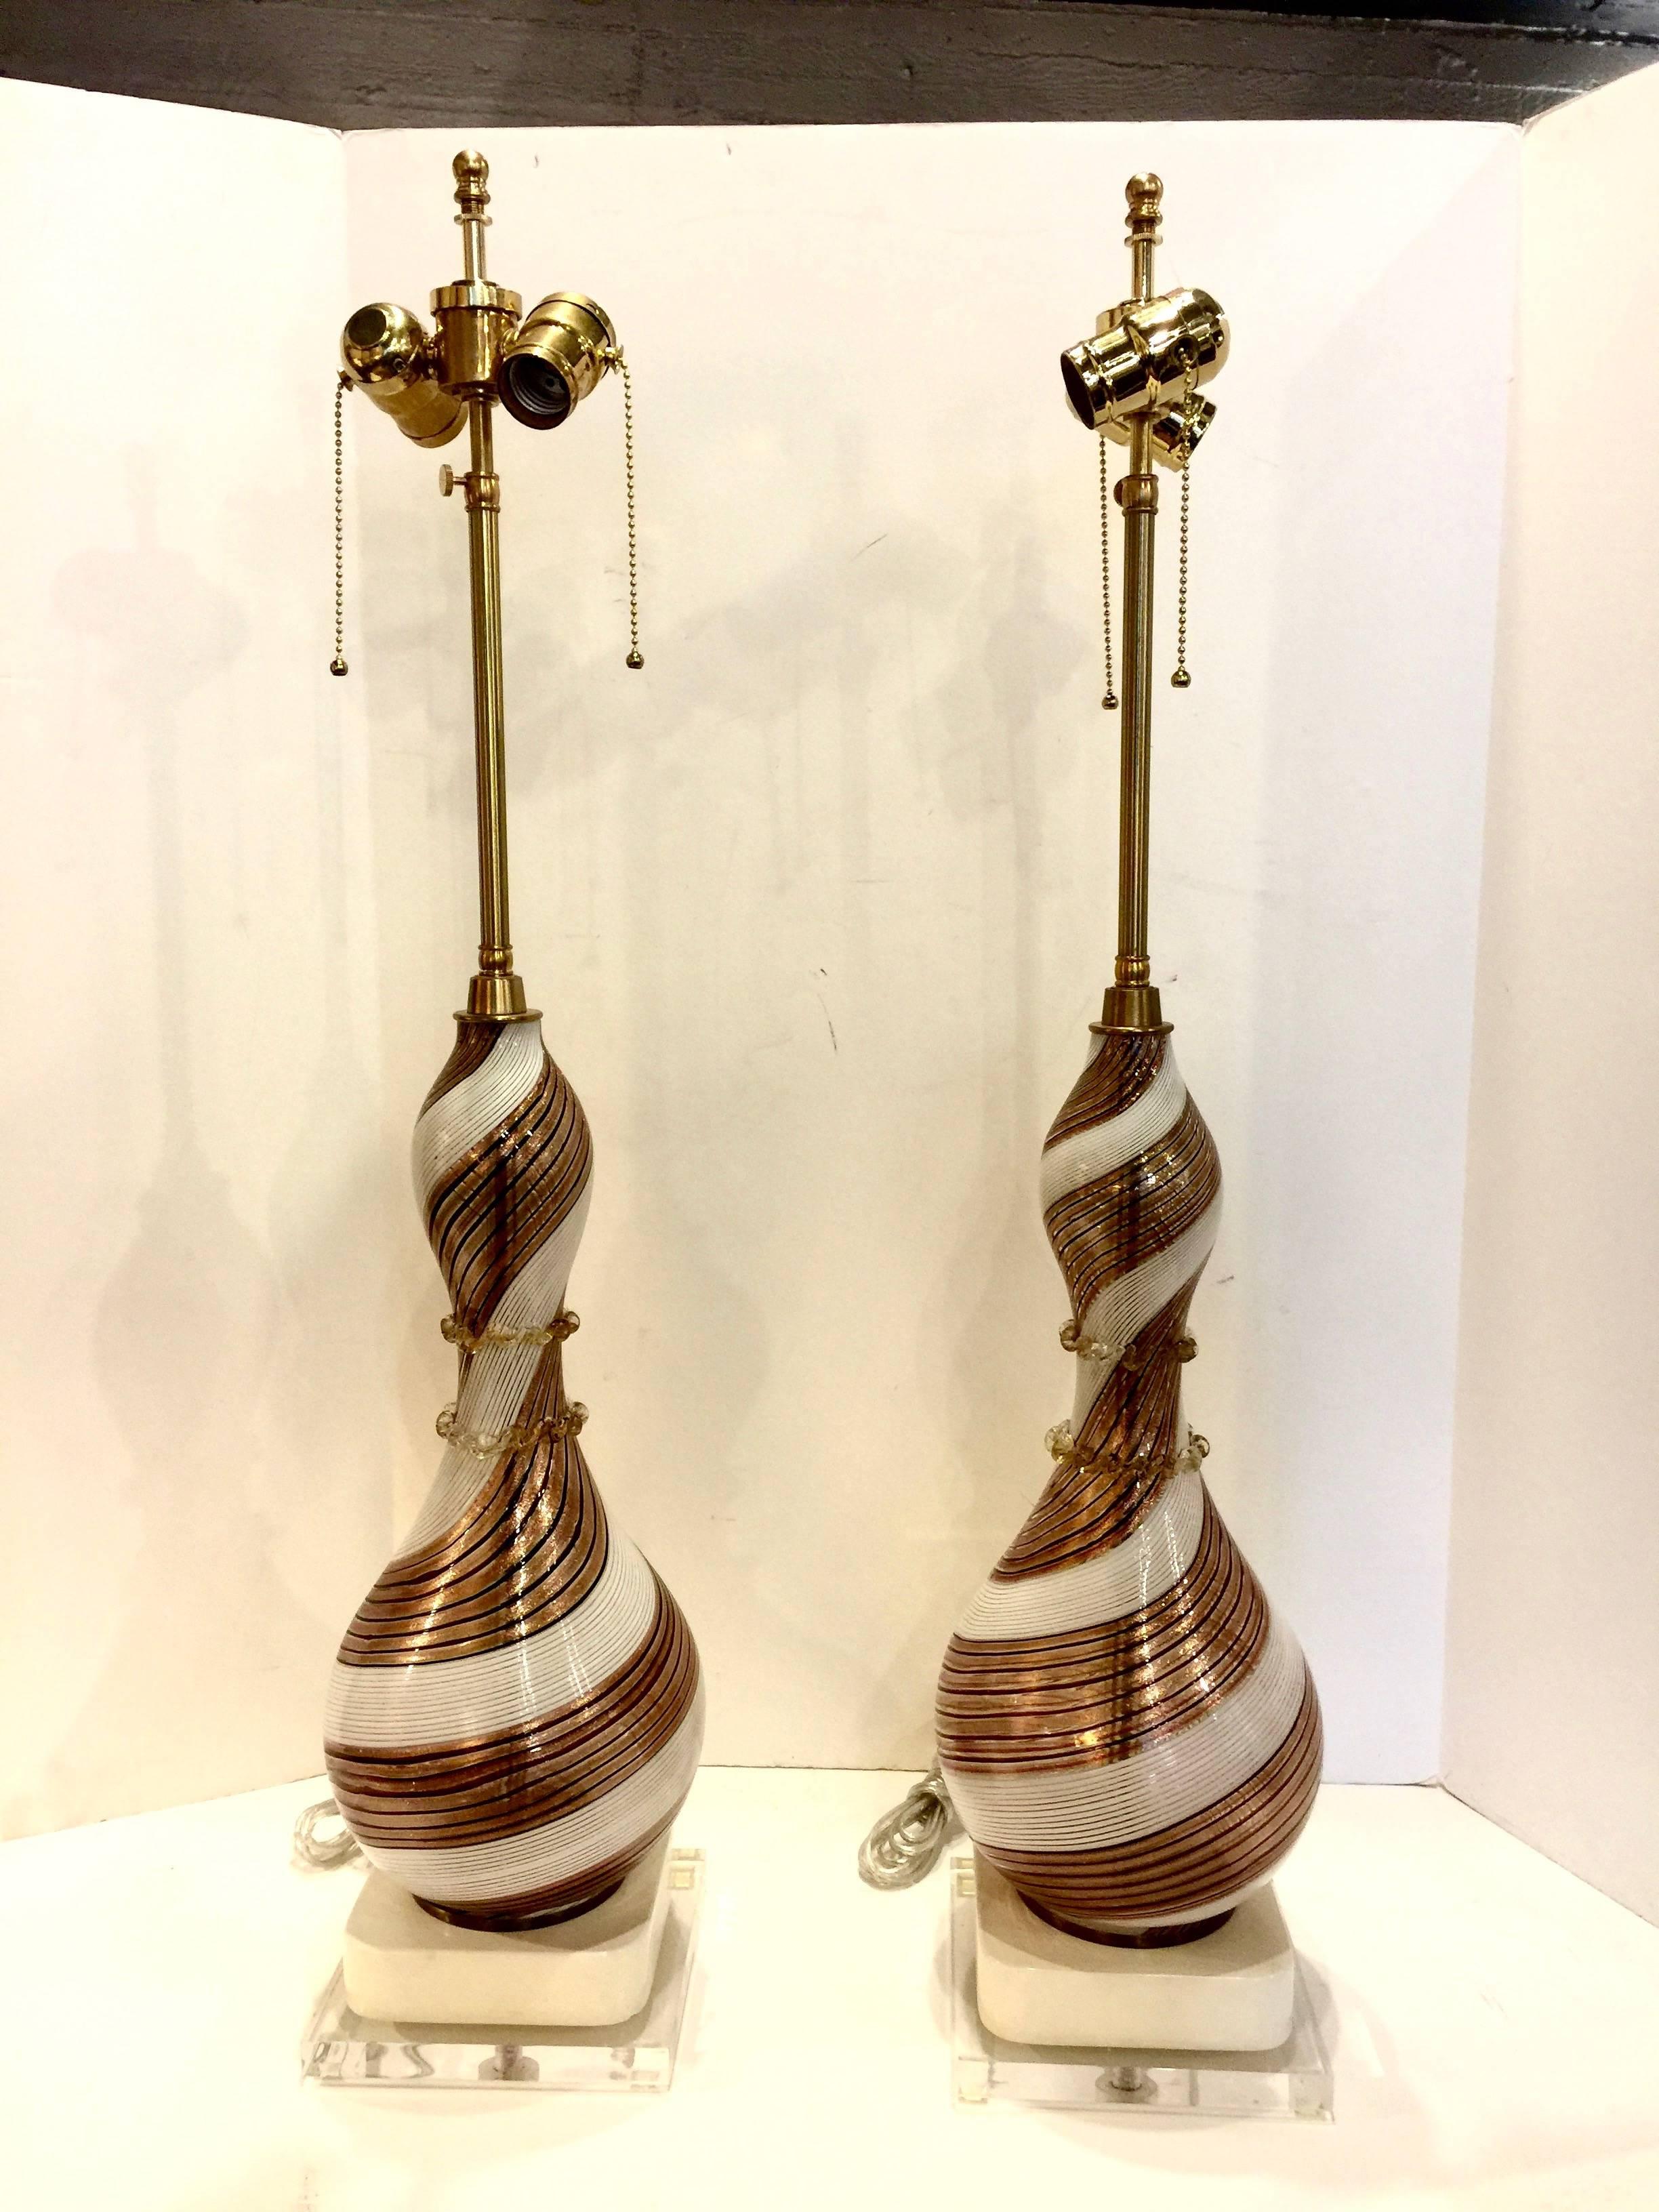 This is a stunning pair of swirled mouth blown Murano glass lamps by the famous Dino Martens. The glass bases were created with swirled and ribbed gold accented glass with white opaescent glass forming the contrasting swirl. New Lucite bases, top